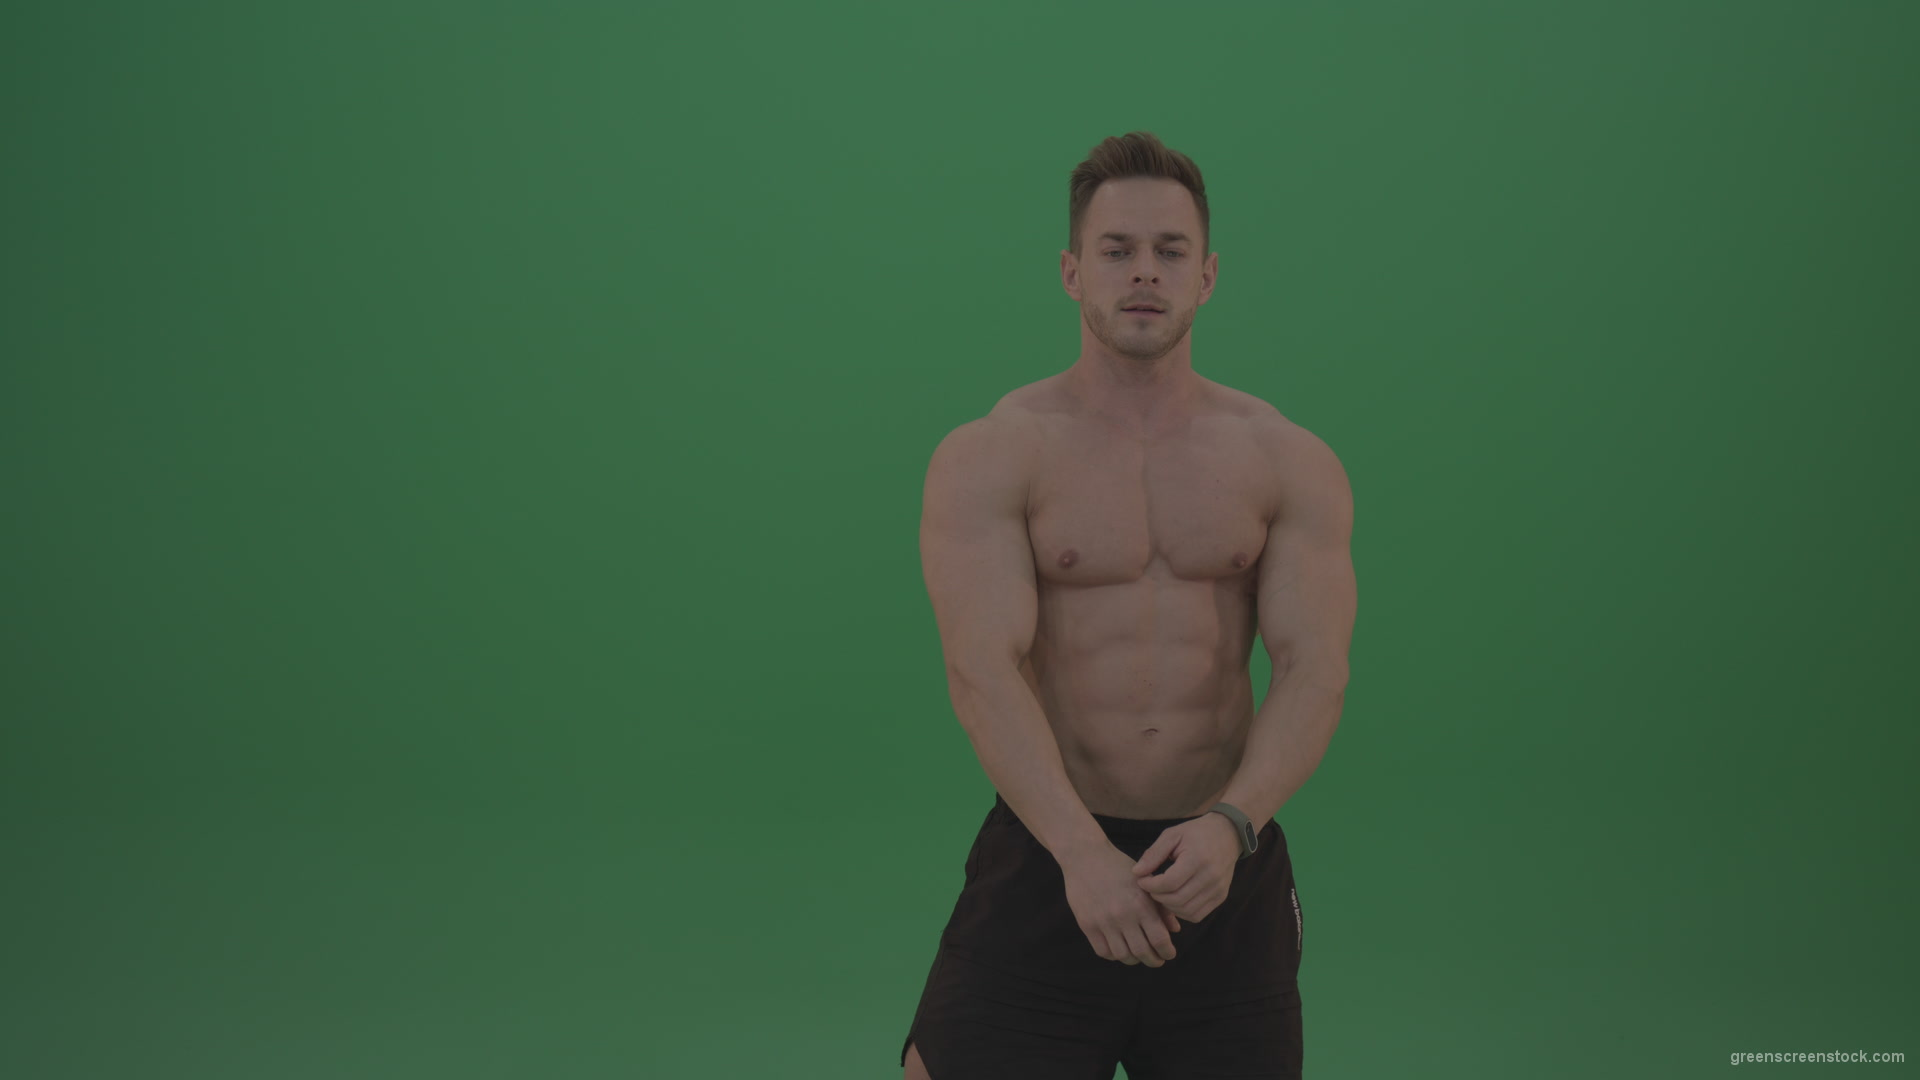 Green-Screen-Blone_Bodybuilder_Demonstrating_Front_Double_Biceps_And_Lateral_Spread_Positions_On_Green_Screen_Wall_Background_001 Green Screen Stock